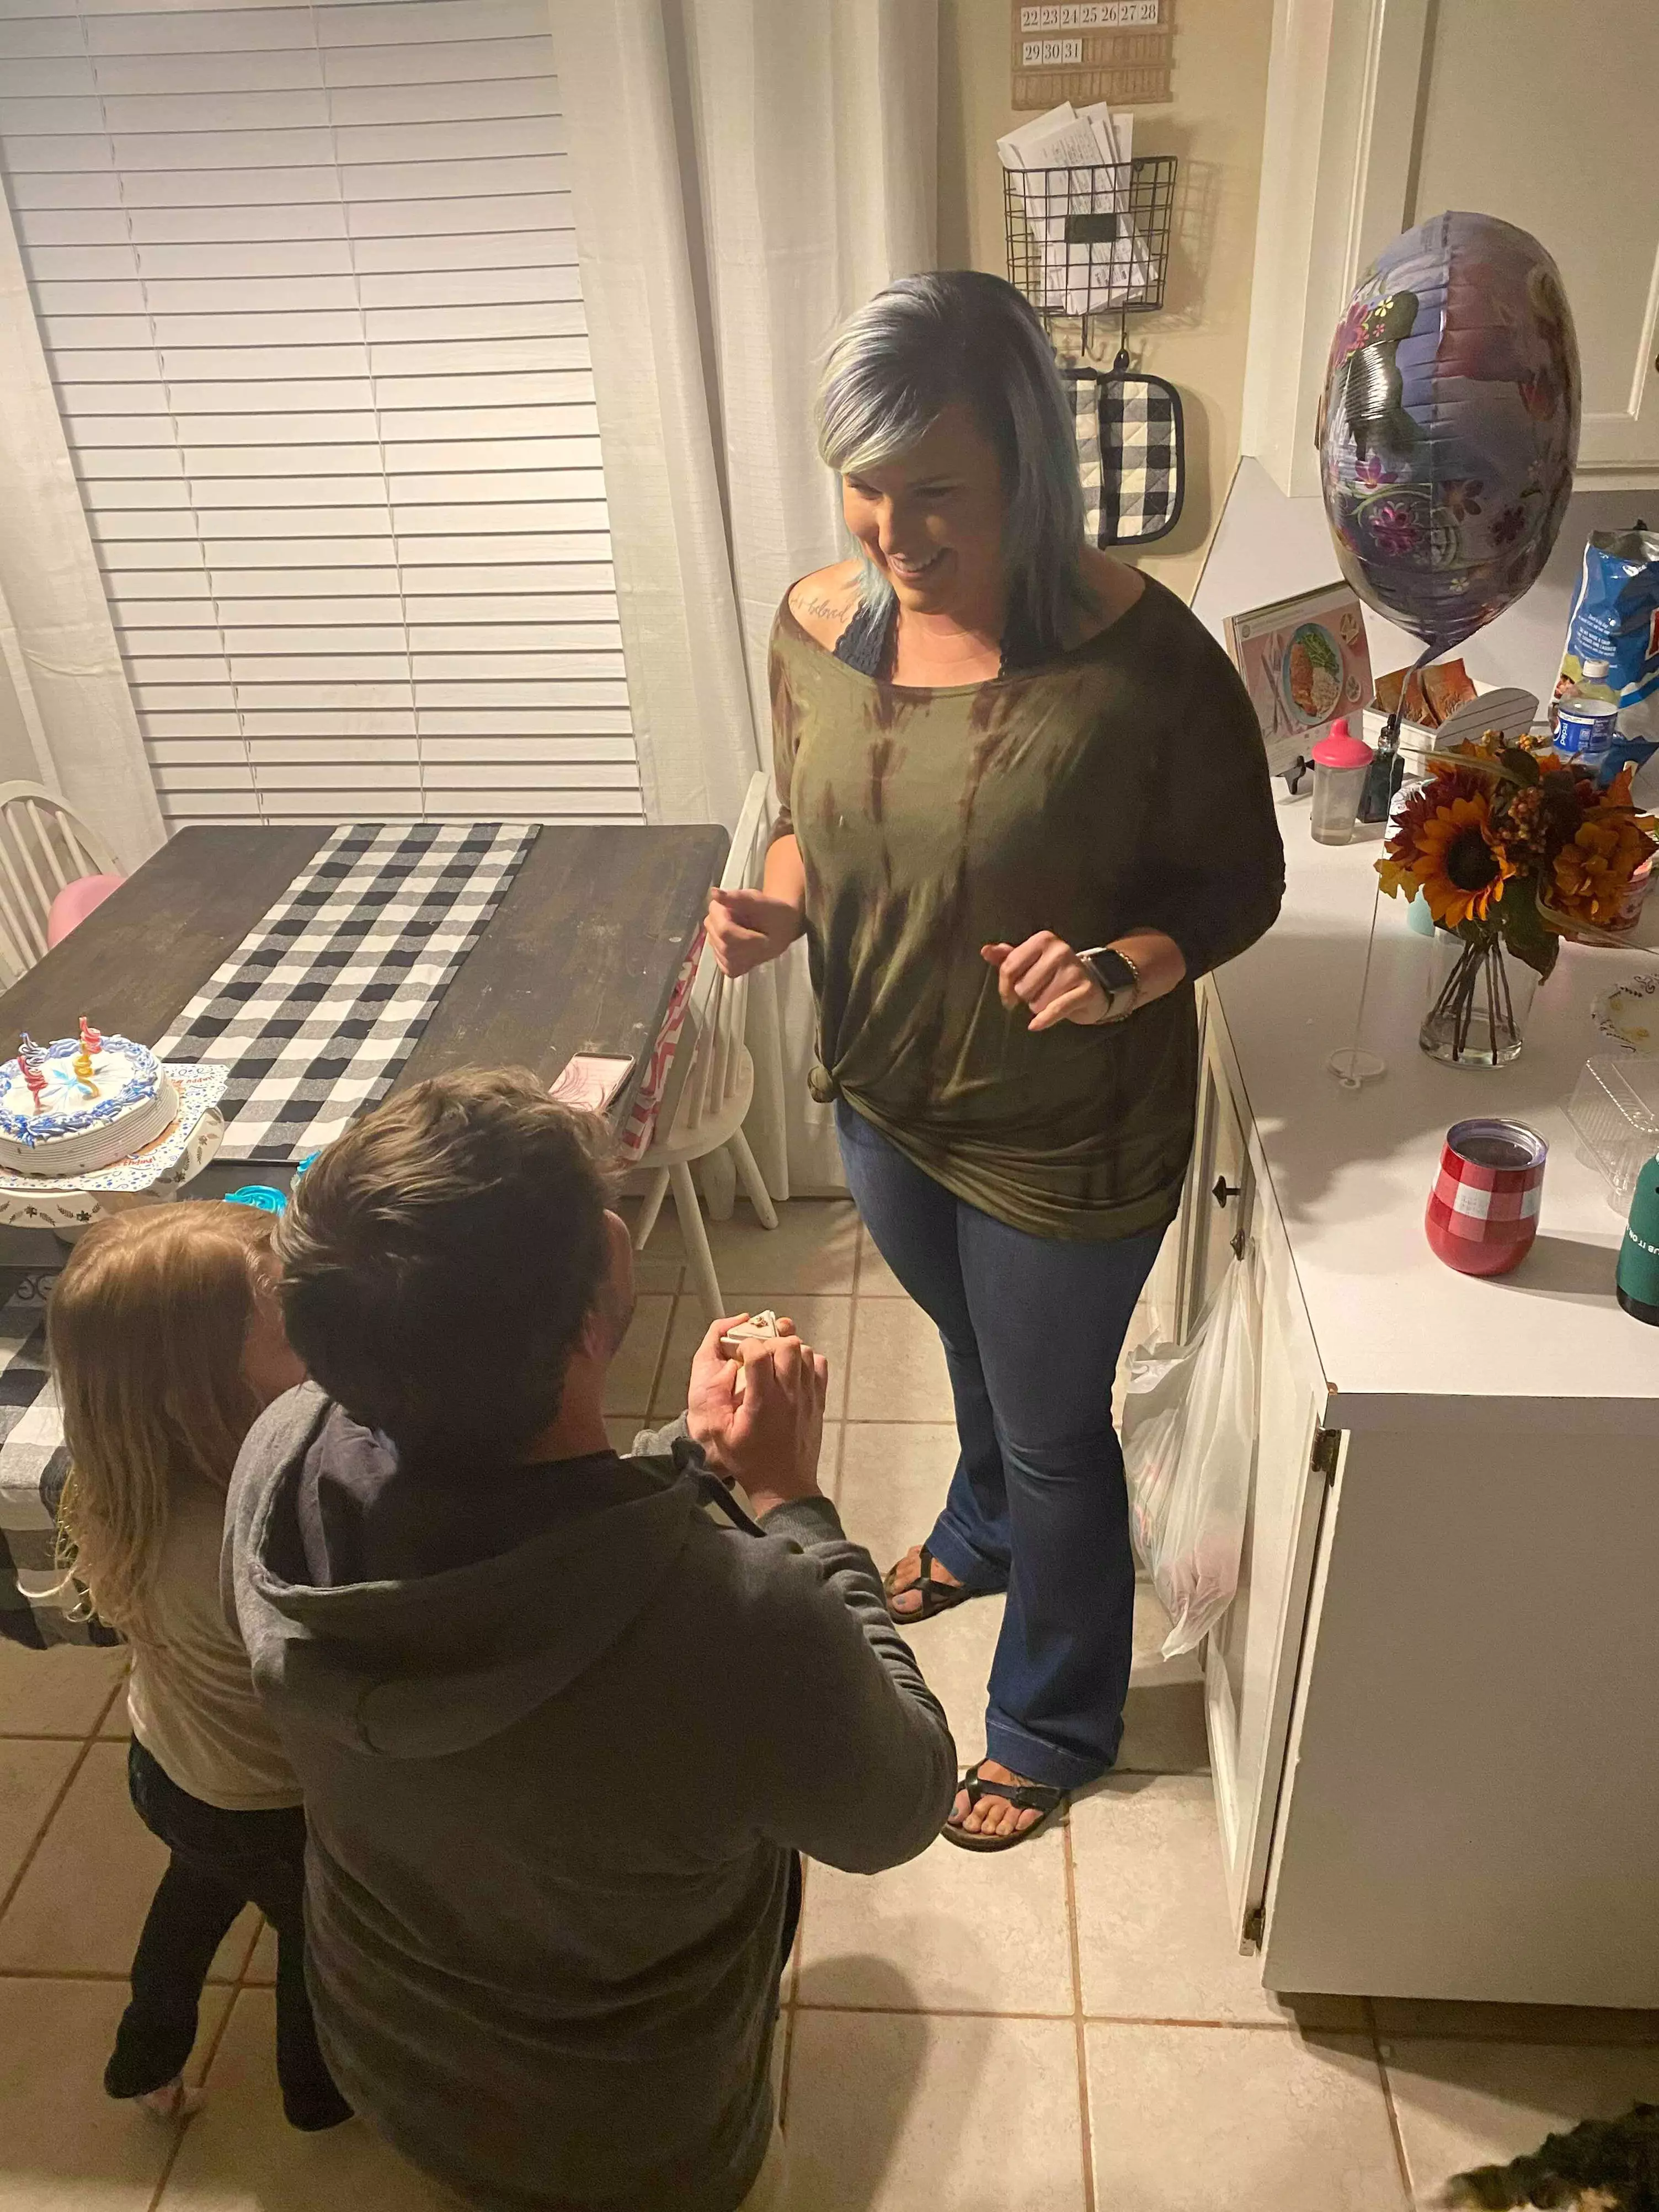 Adam proposed for real six months later (